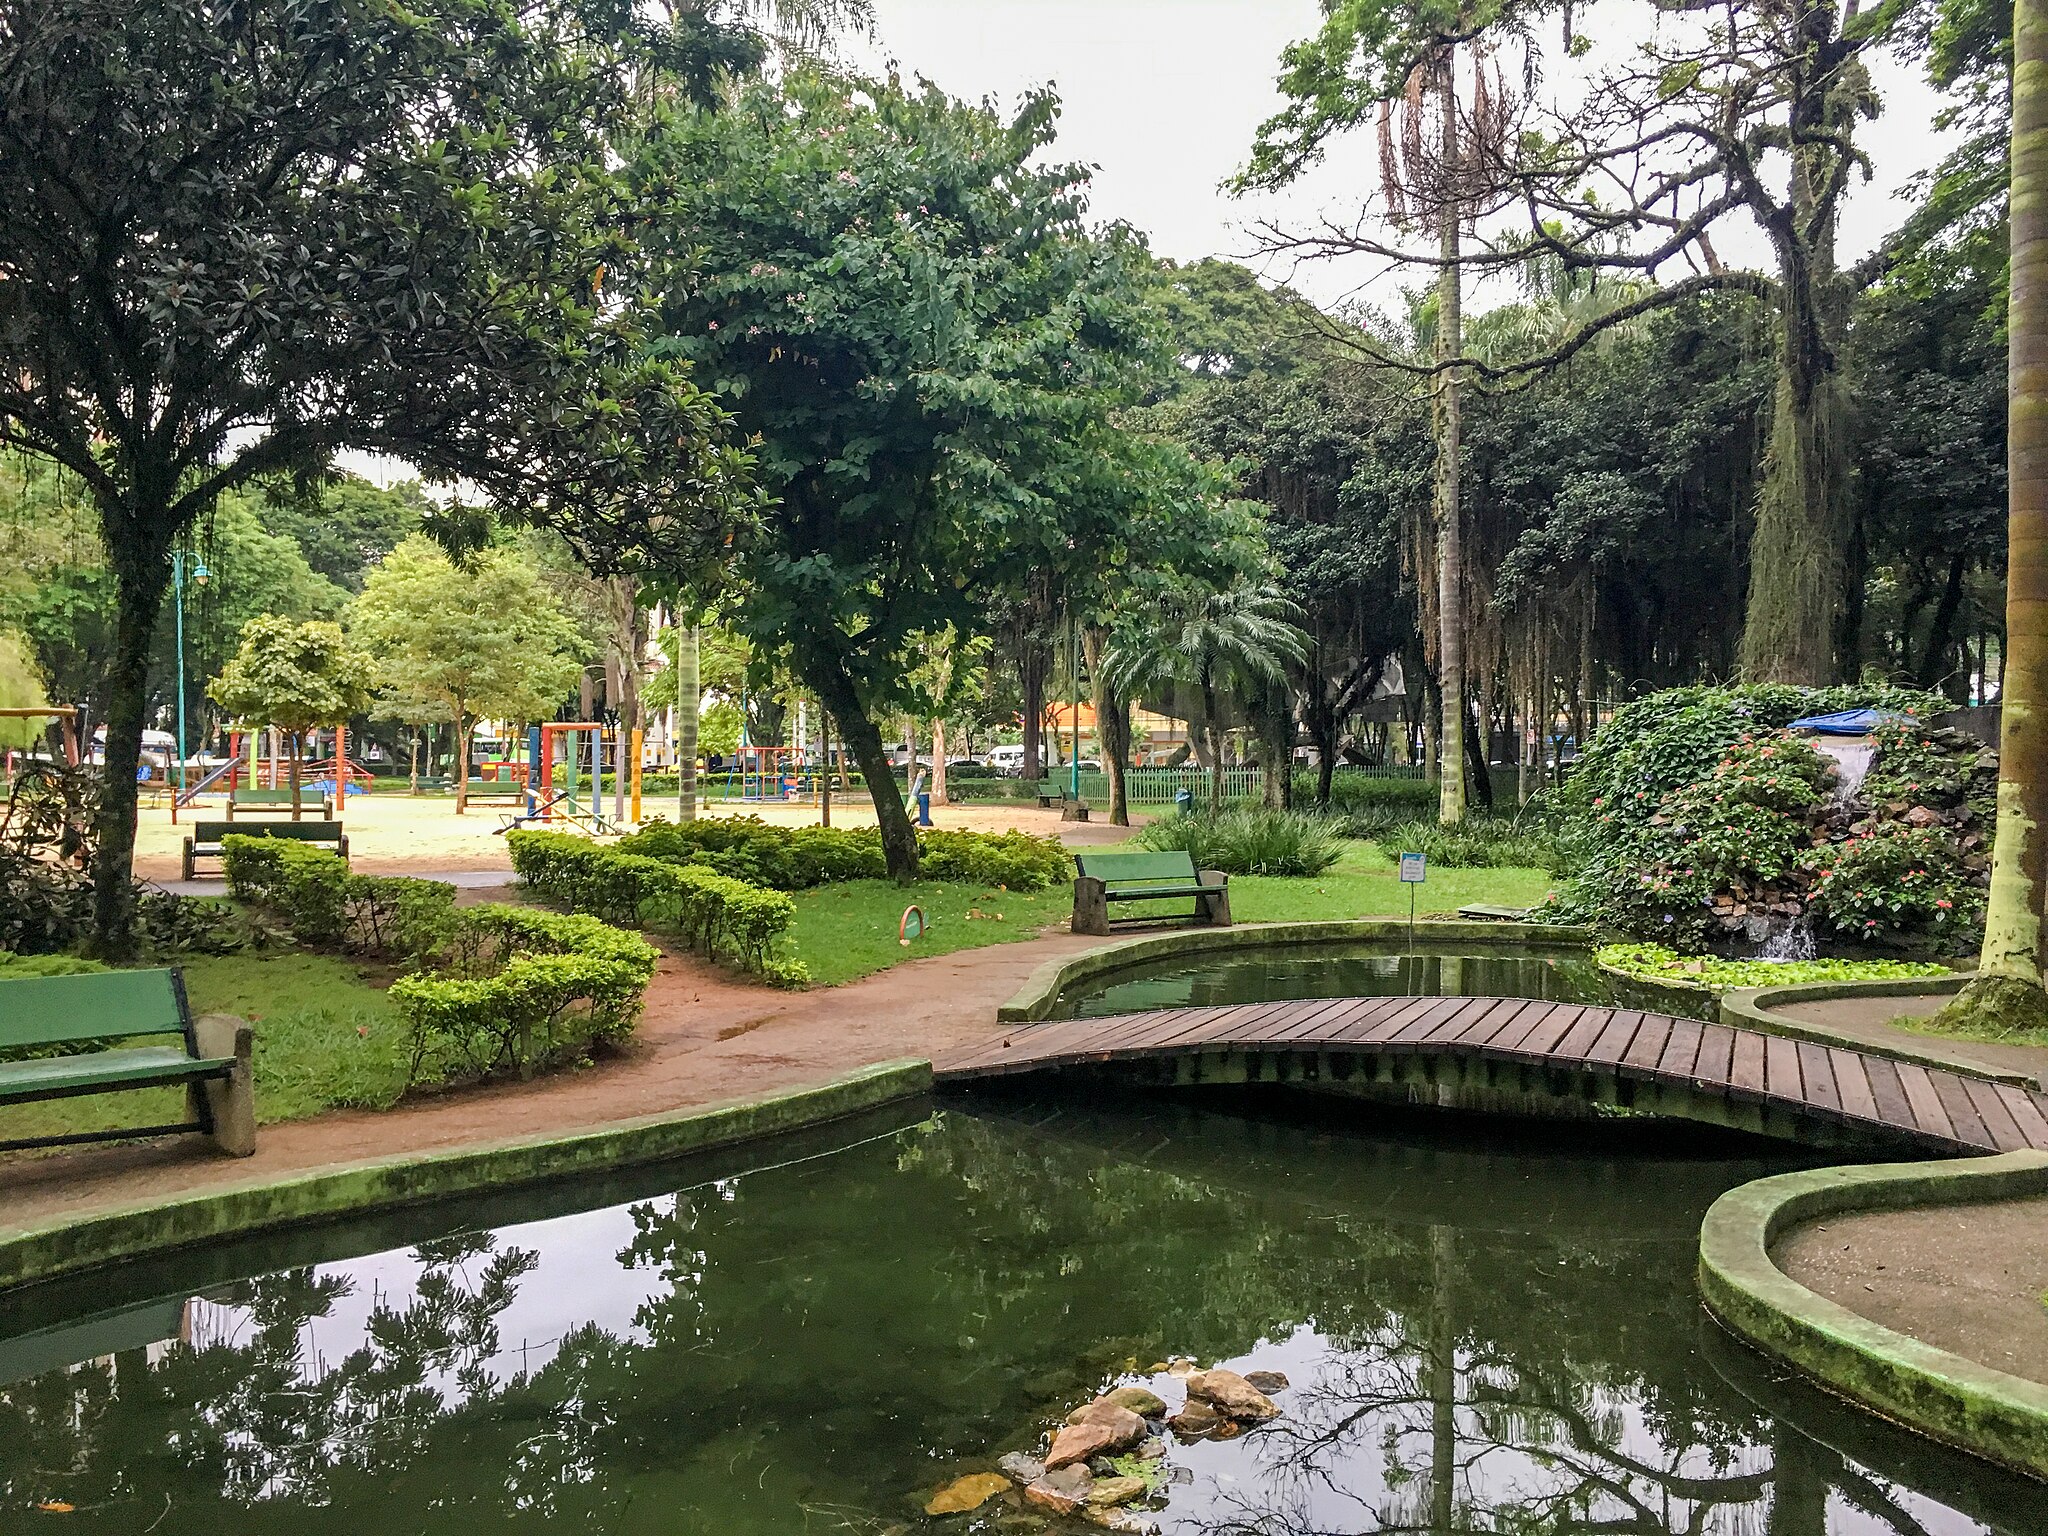 Parque Santos Dumont. Mike Peel/Wikimedia Commons<a style='float:right;color:#ccc' href='https://www3.al.sp.gov.br/repositorio/noticia/N-05-2023/fg301245.jpg' target=_blank><i class='bi bi-zoom-in'></i> Clique para ver a imagem </a>